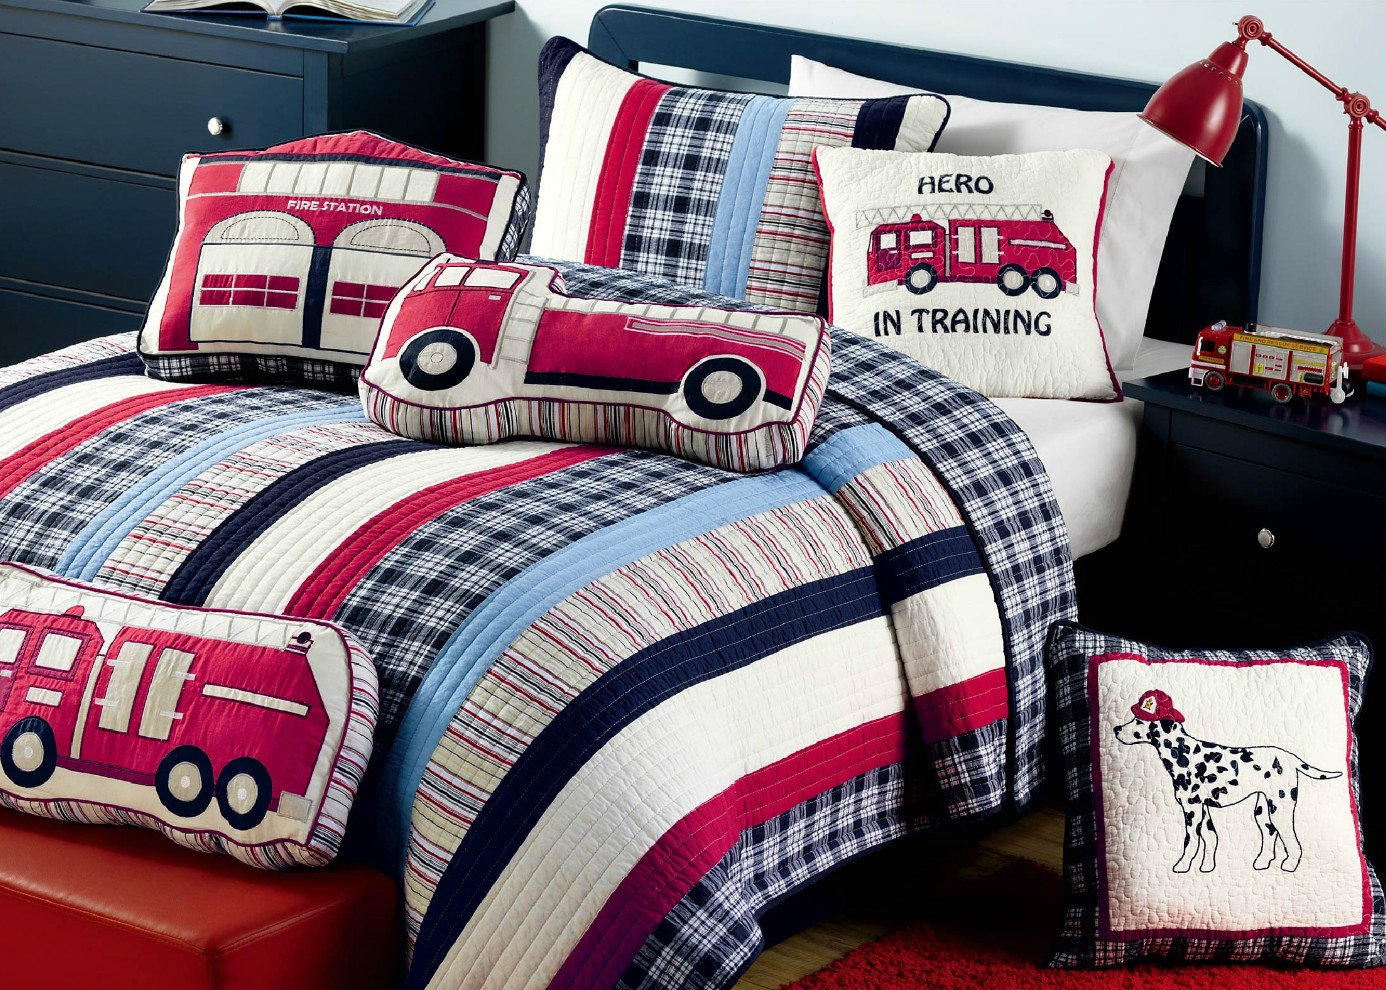 Ronnie Varsity Striped Fire Truck Classic Novelty Decor Throw Pillow